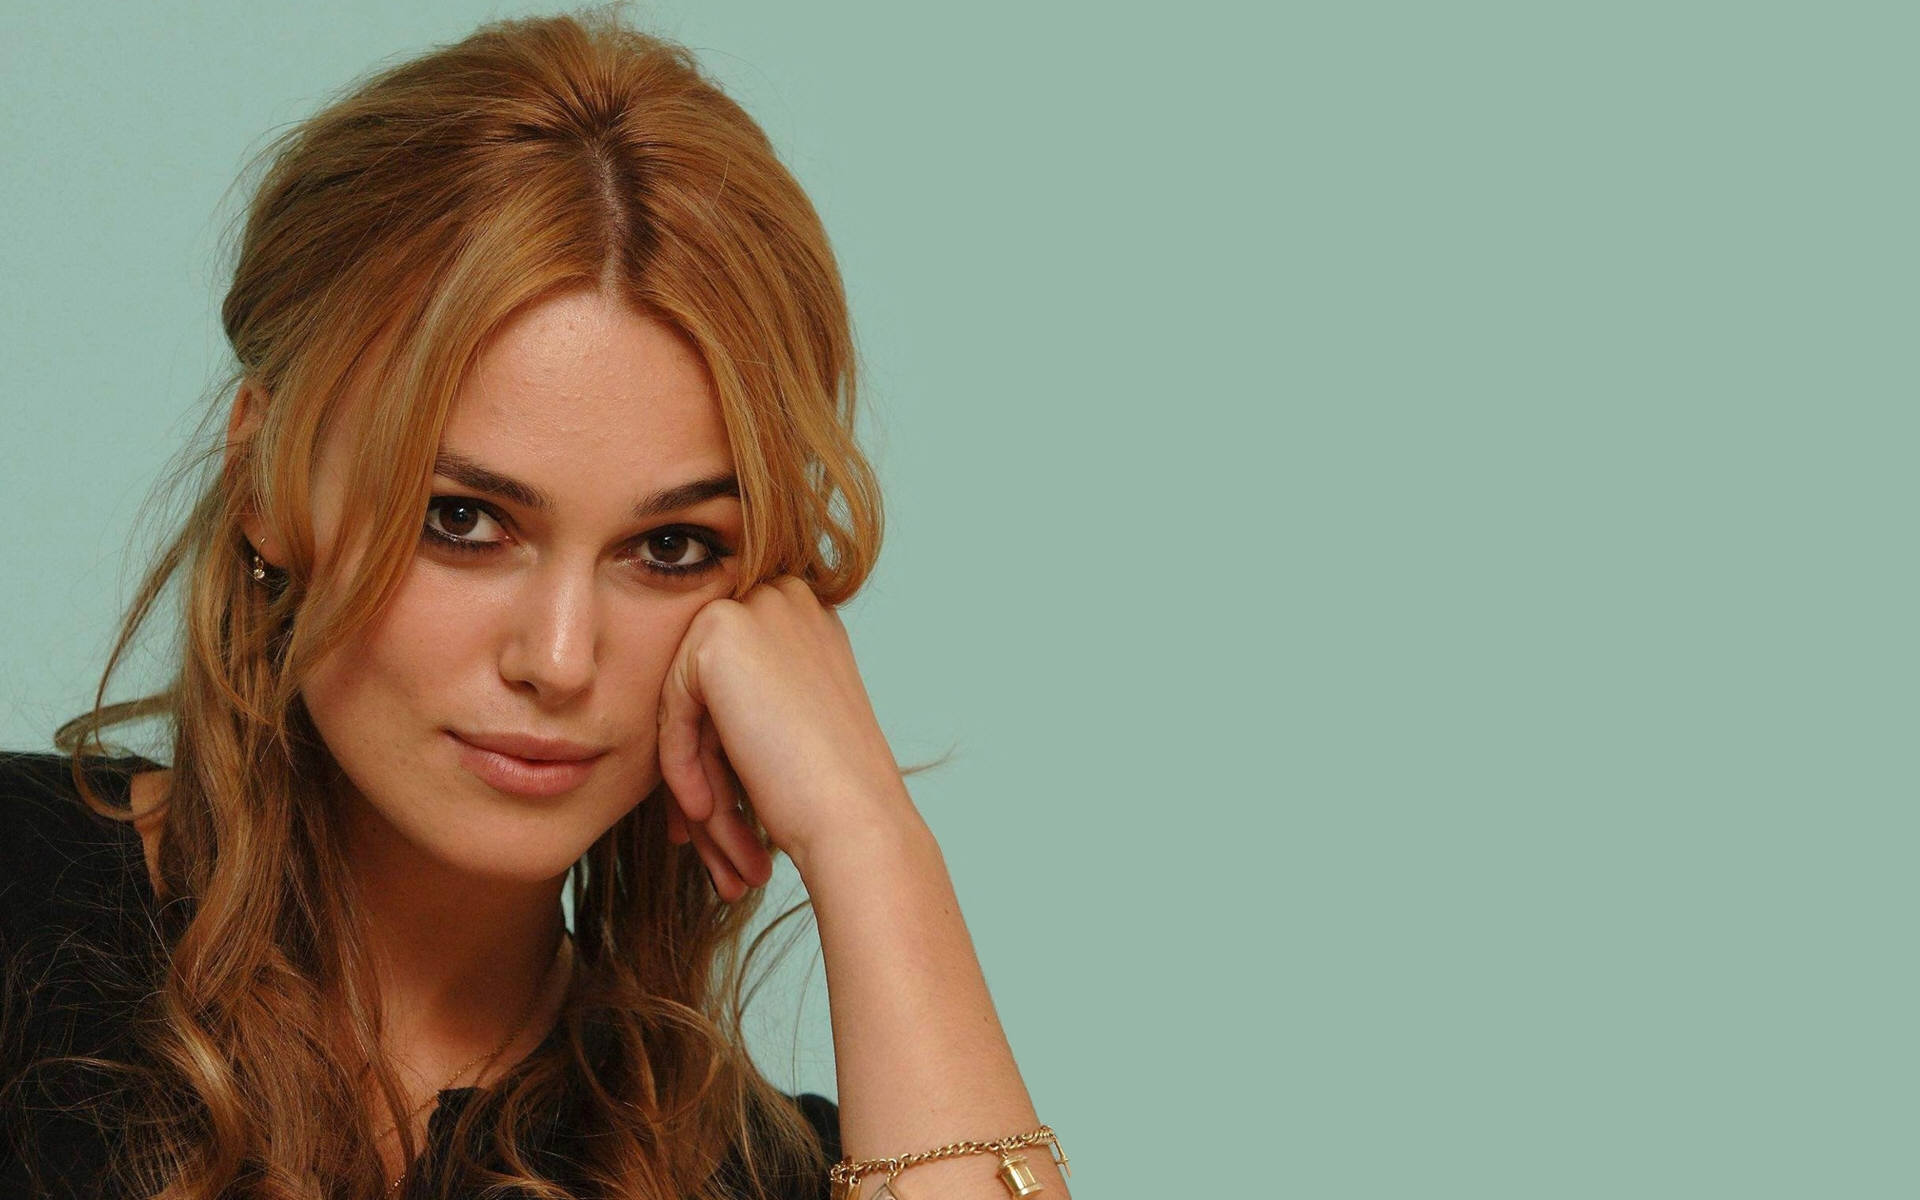 keira knightley hd wallpapers,hair,face,hairstyle,blond,eyebrow